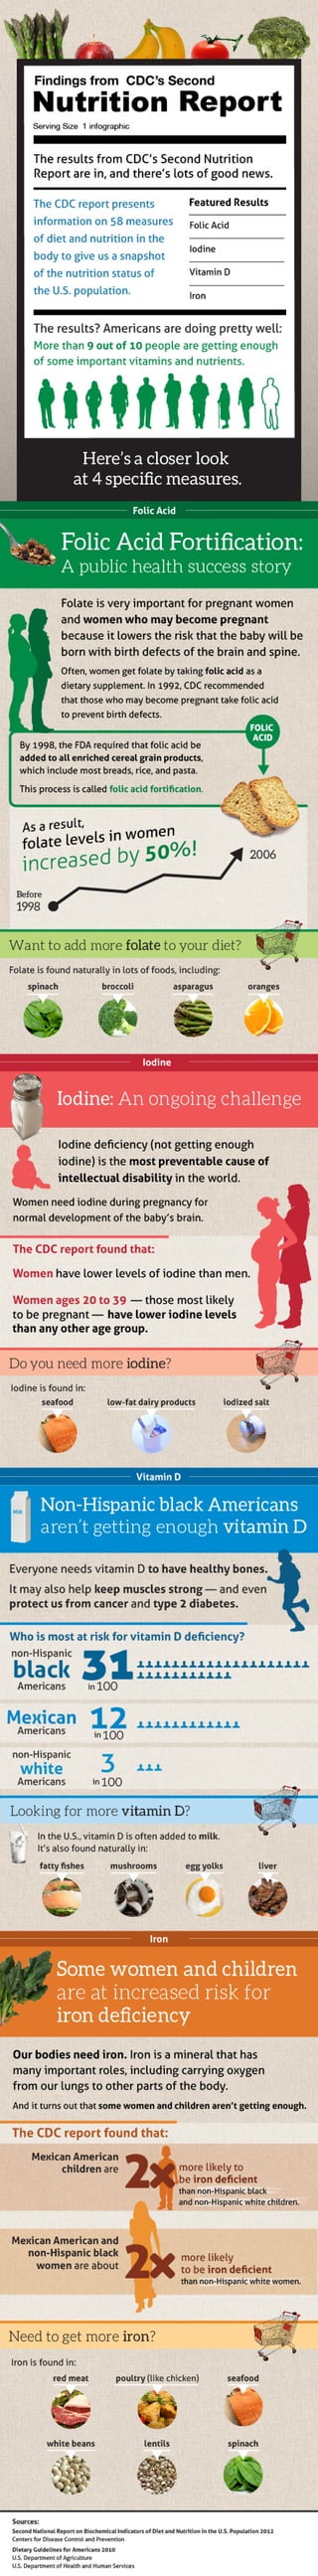 CDC nutrition Infographic